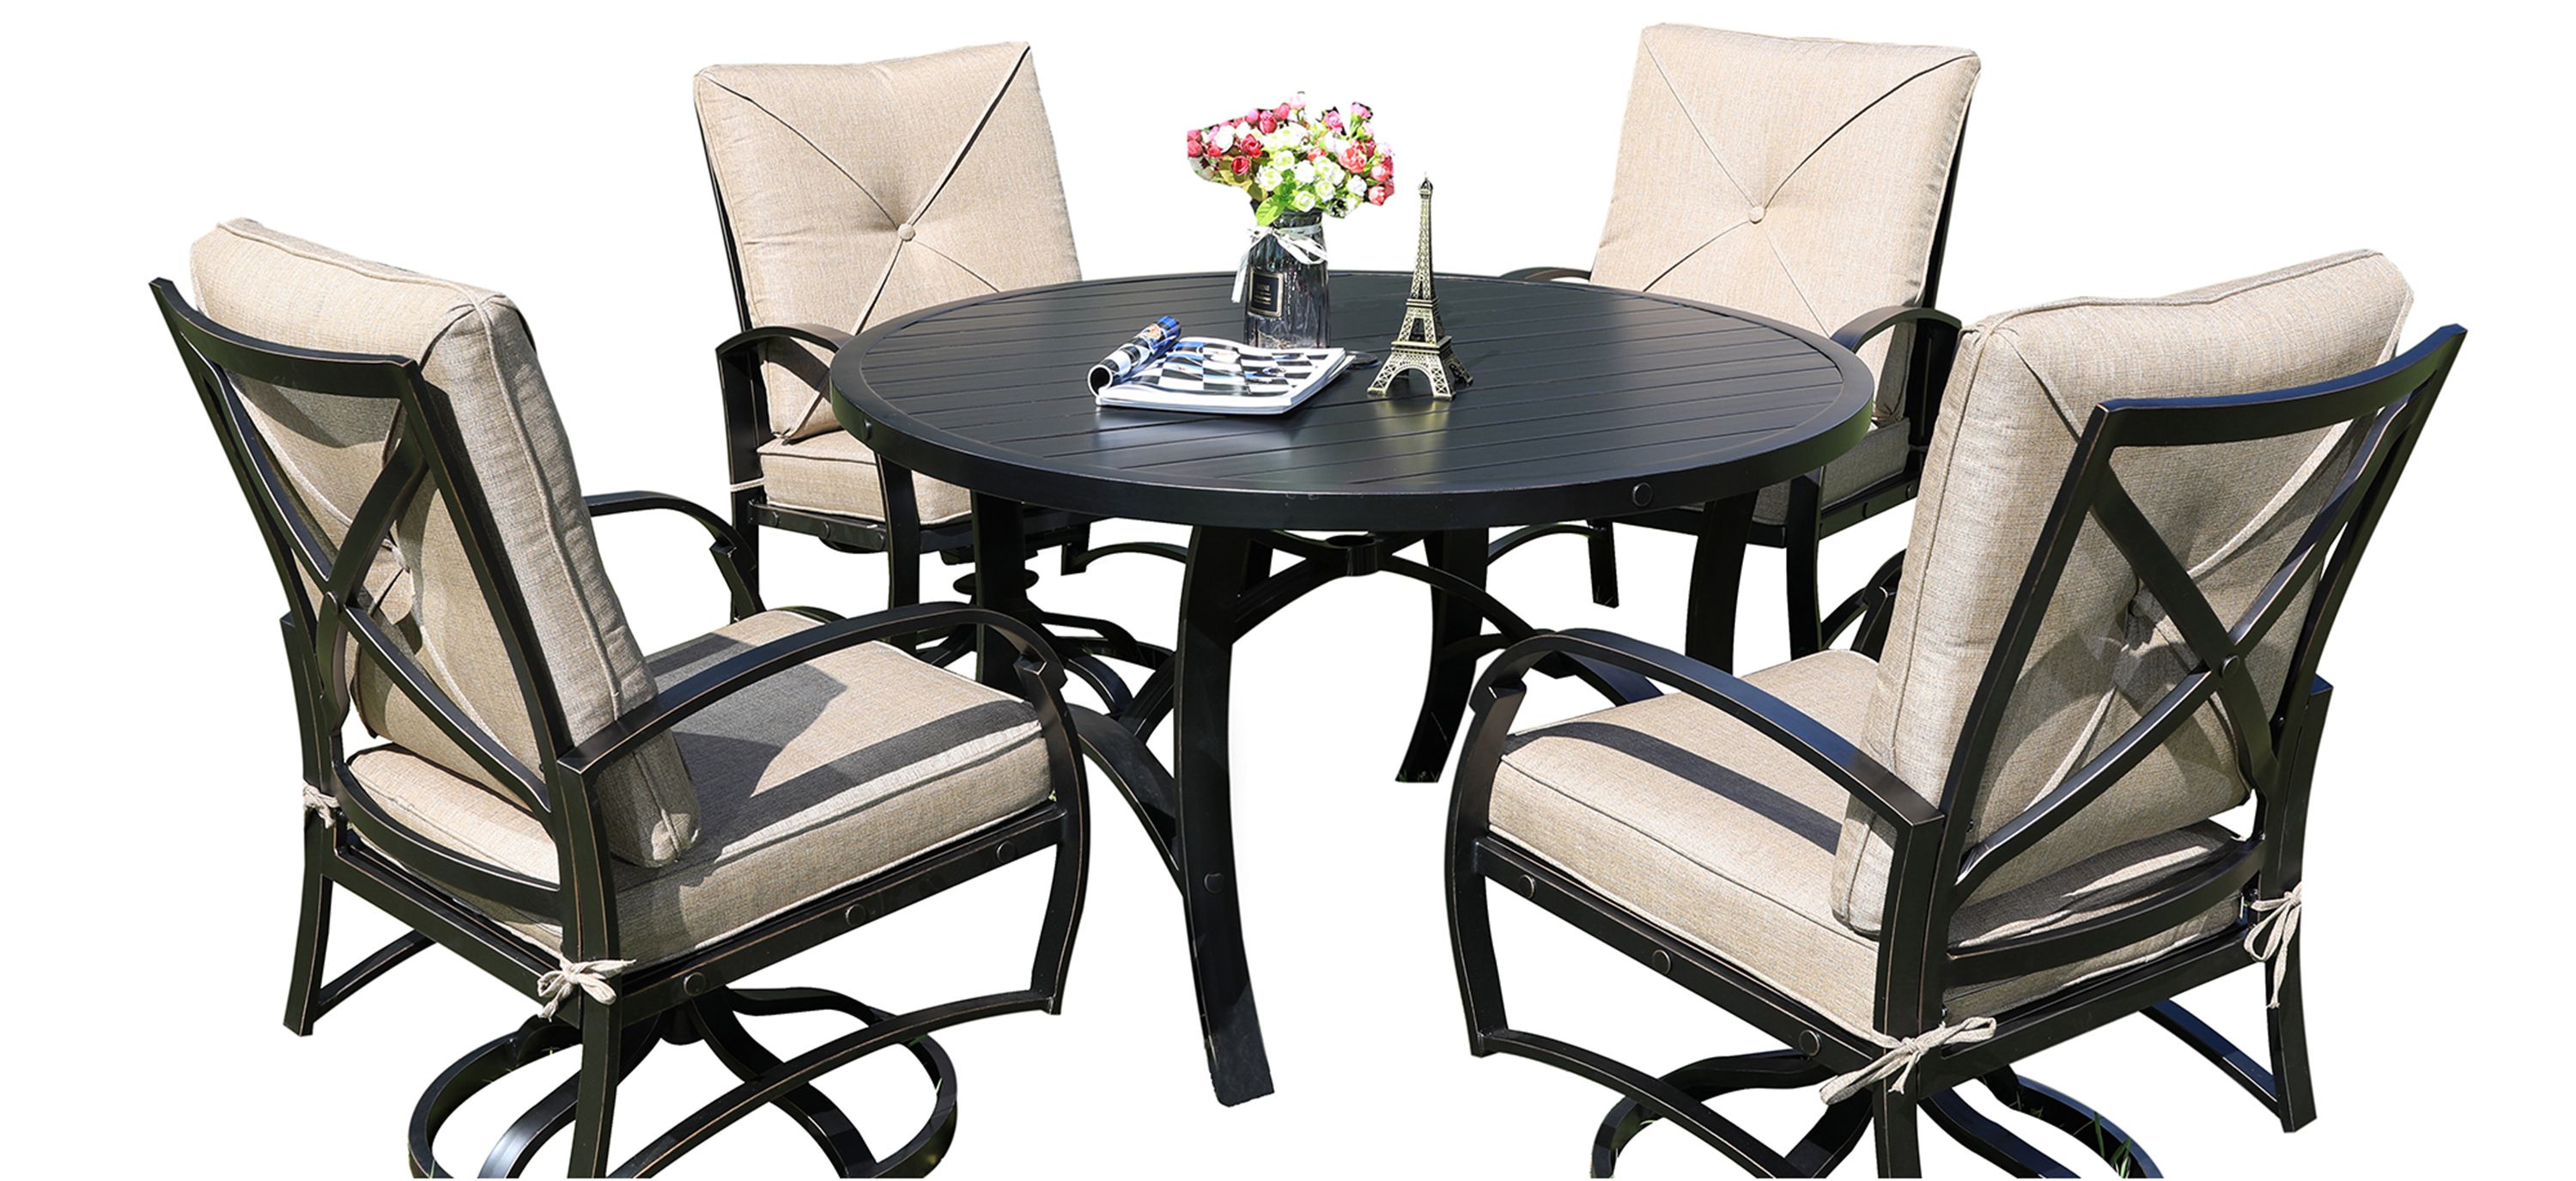 Valencia 5 Pc. Swivel Chair Outdoor Dining Set